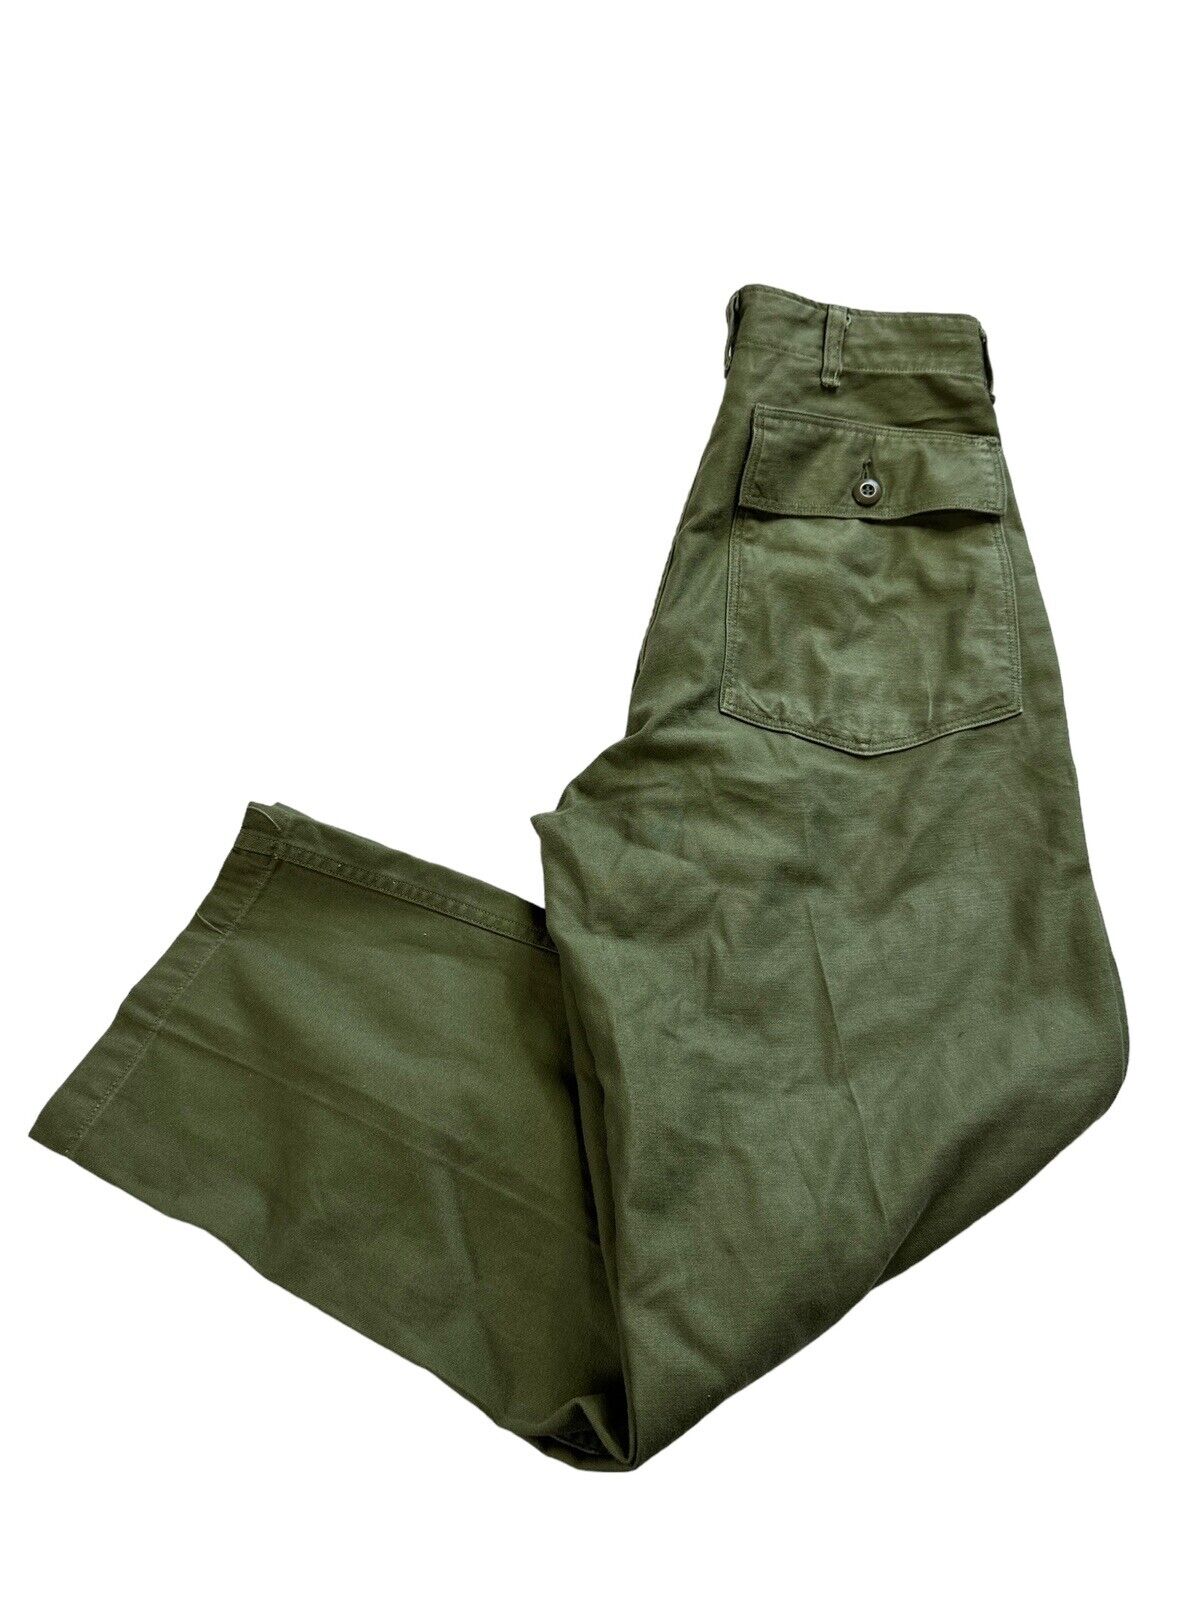 Vintage US Army Pants Trousers Men\'s Sateen OG 107 Type I 30X30 Army Green 60\'s